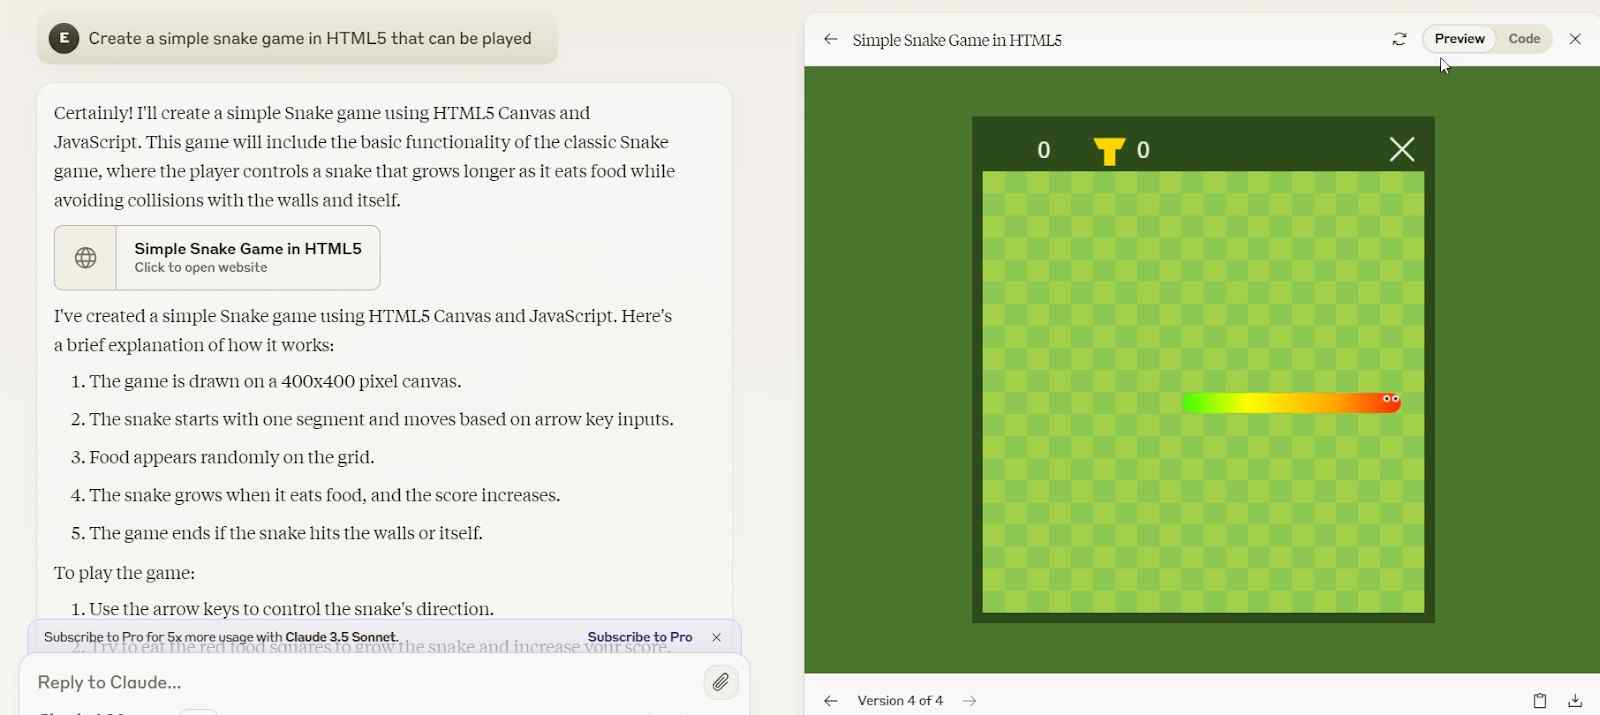 preview-window-showing-a-simple-snake-game-in-html5